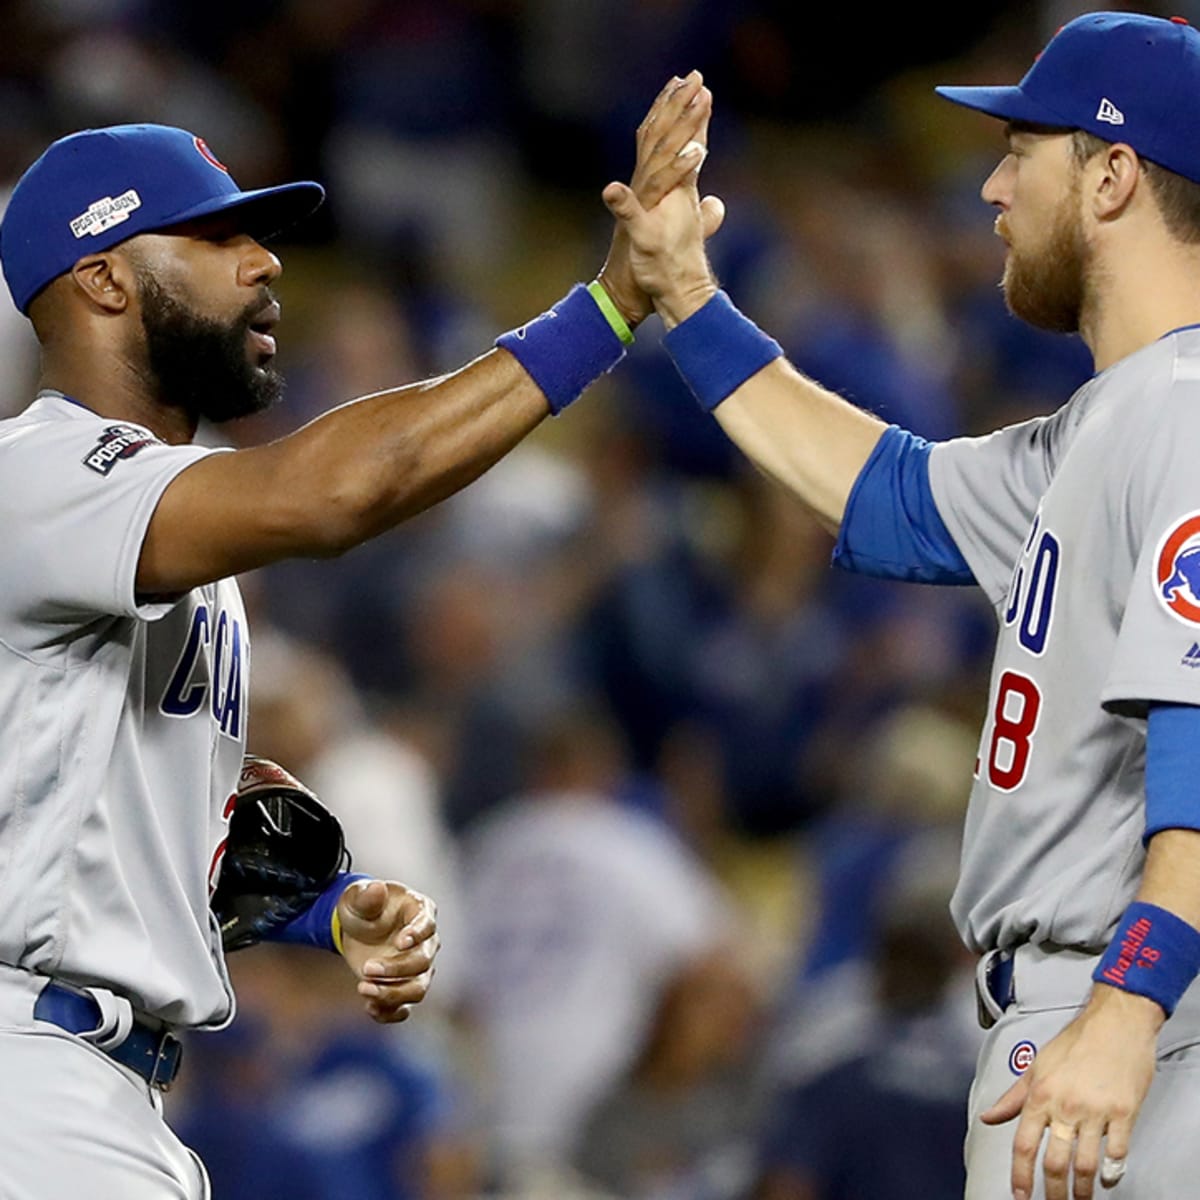 NLCS: Cubs in control despite Jason Heyward's struggles - Sports Illustrated